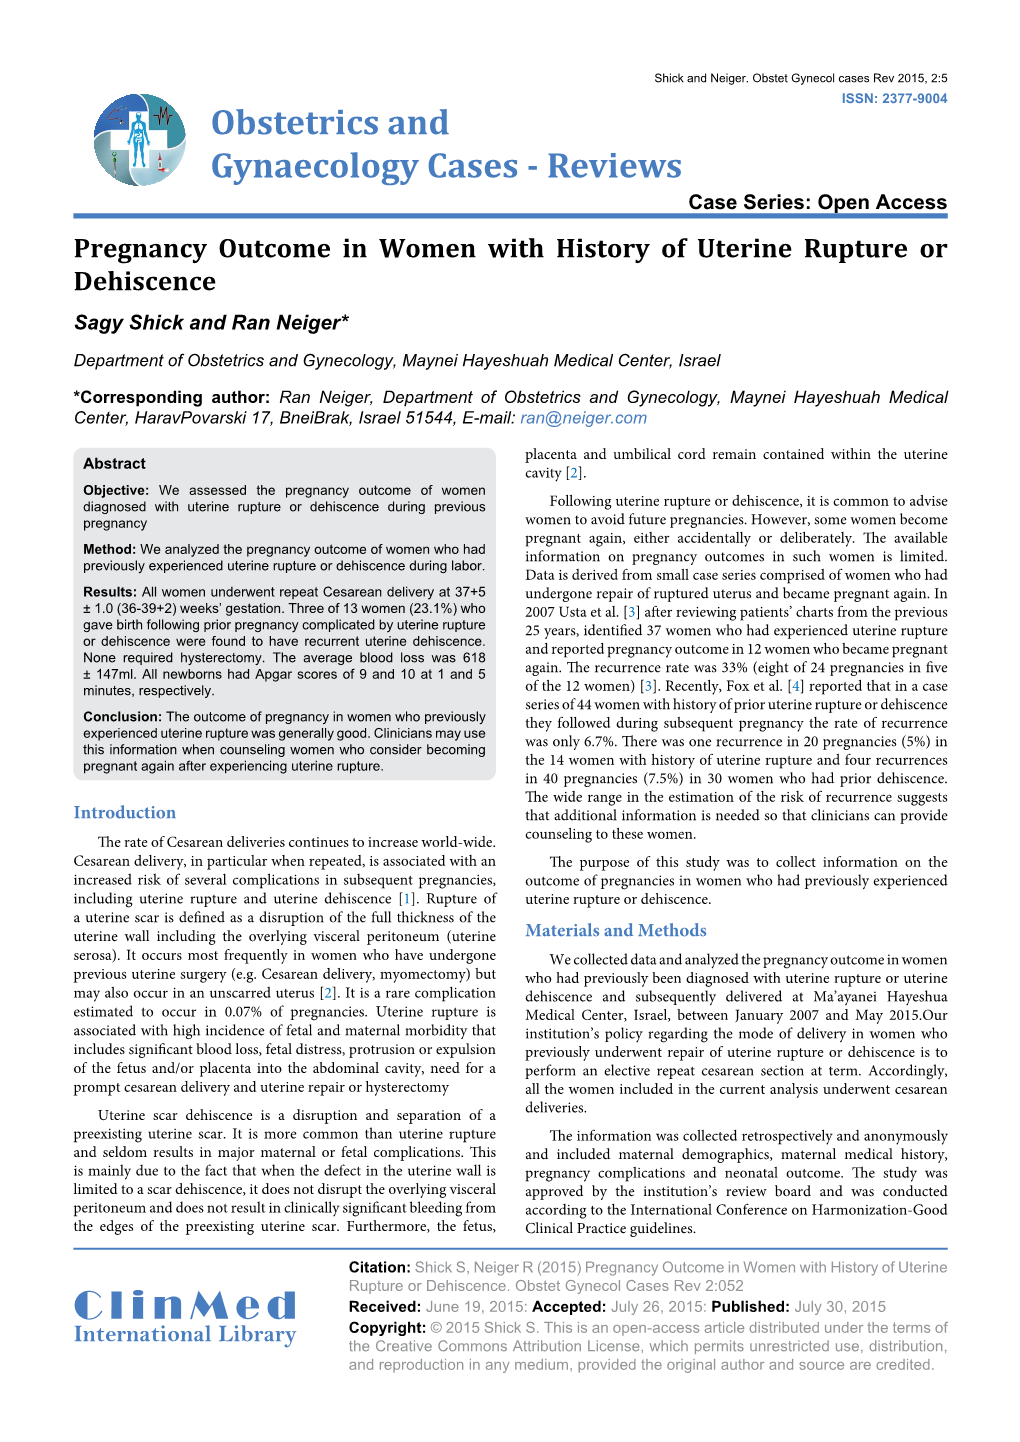 Pregnancy Outcome in Women with History of Uterine Rupture Or Dehiscence Sagy Shick and Ran Neiger*